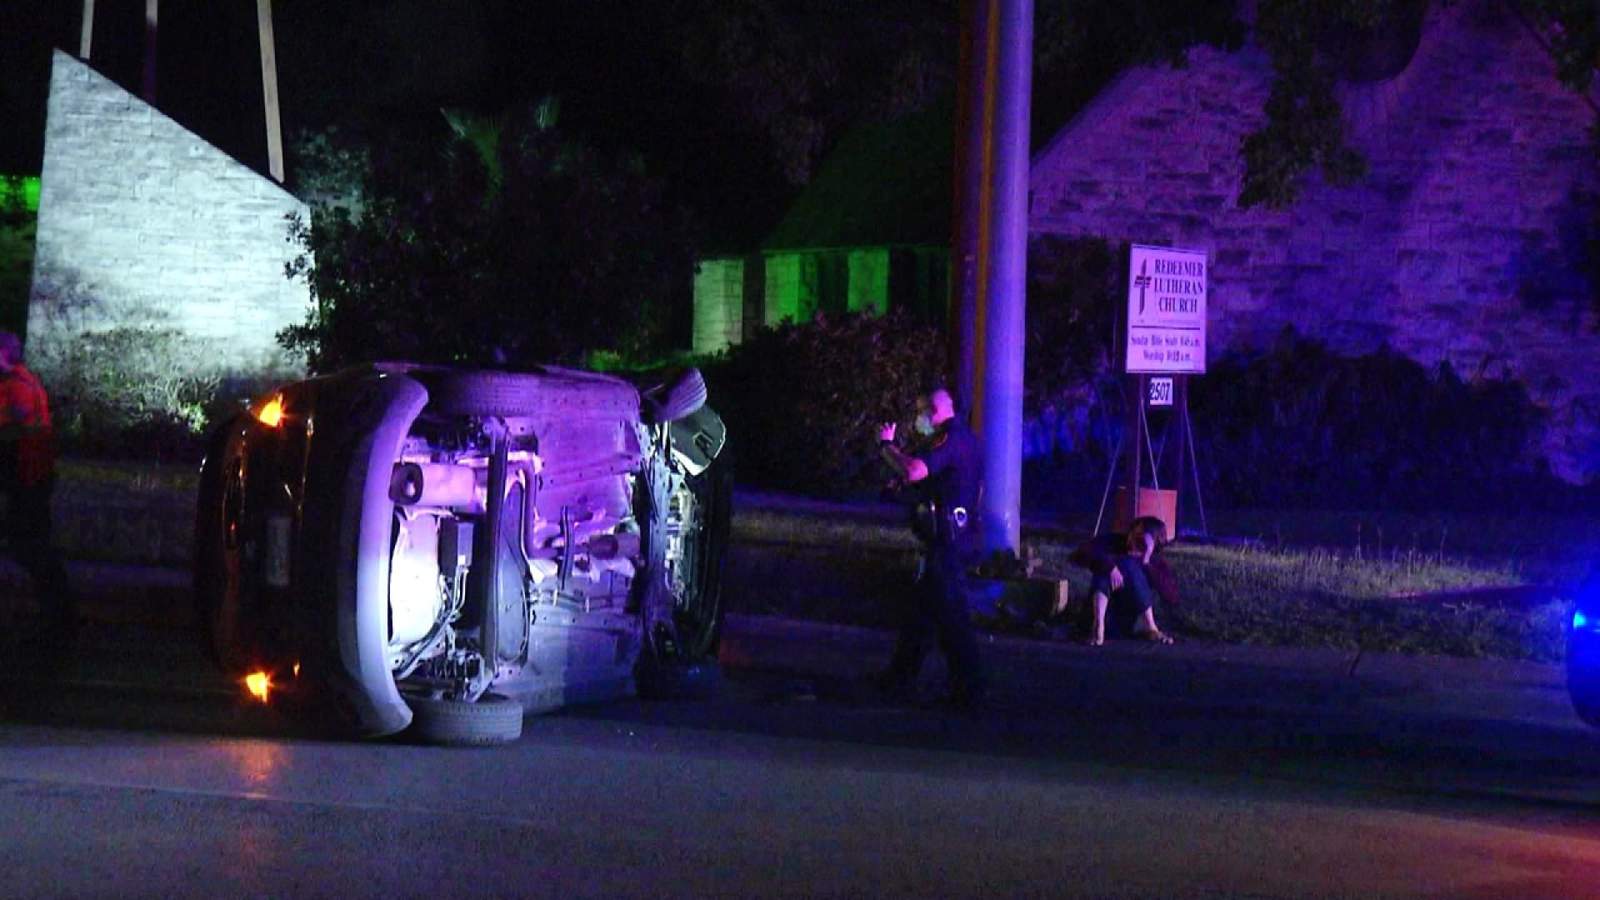 Man taken to hospital after NW Side rollover crash, police say